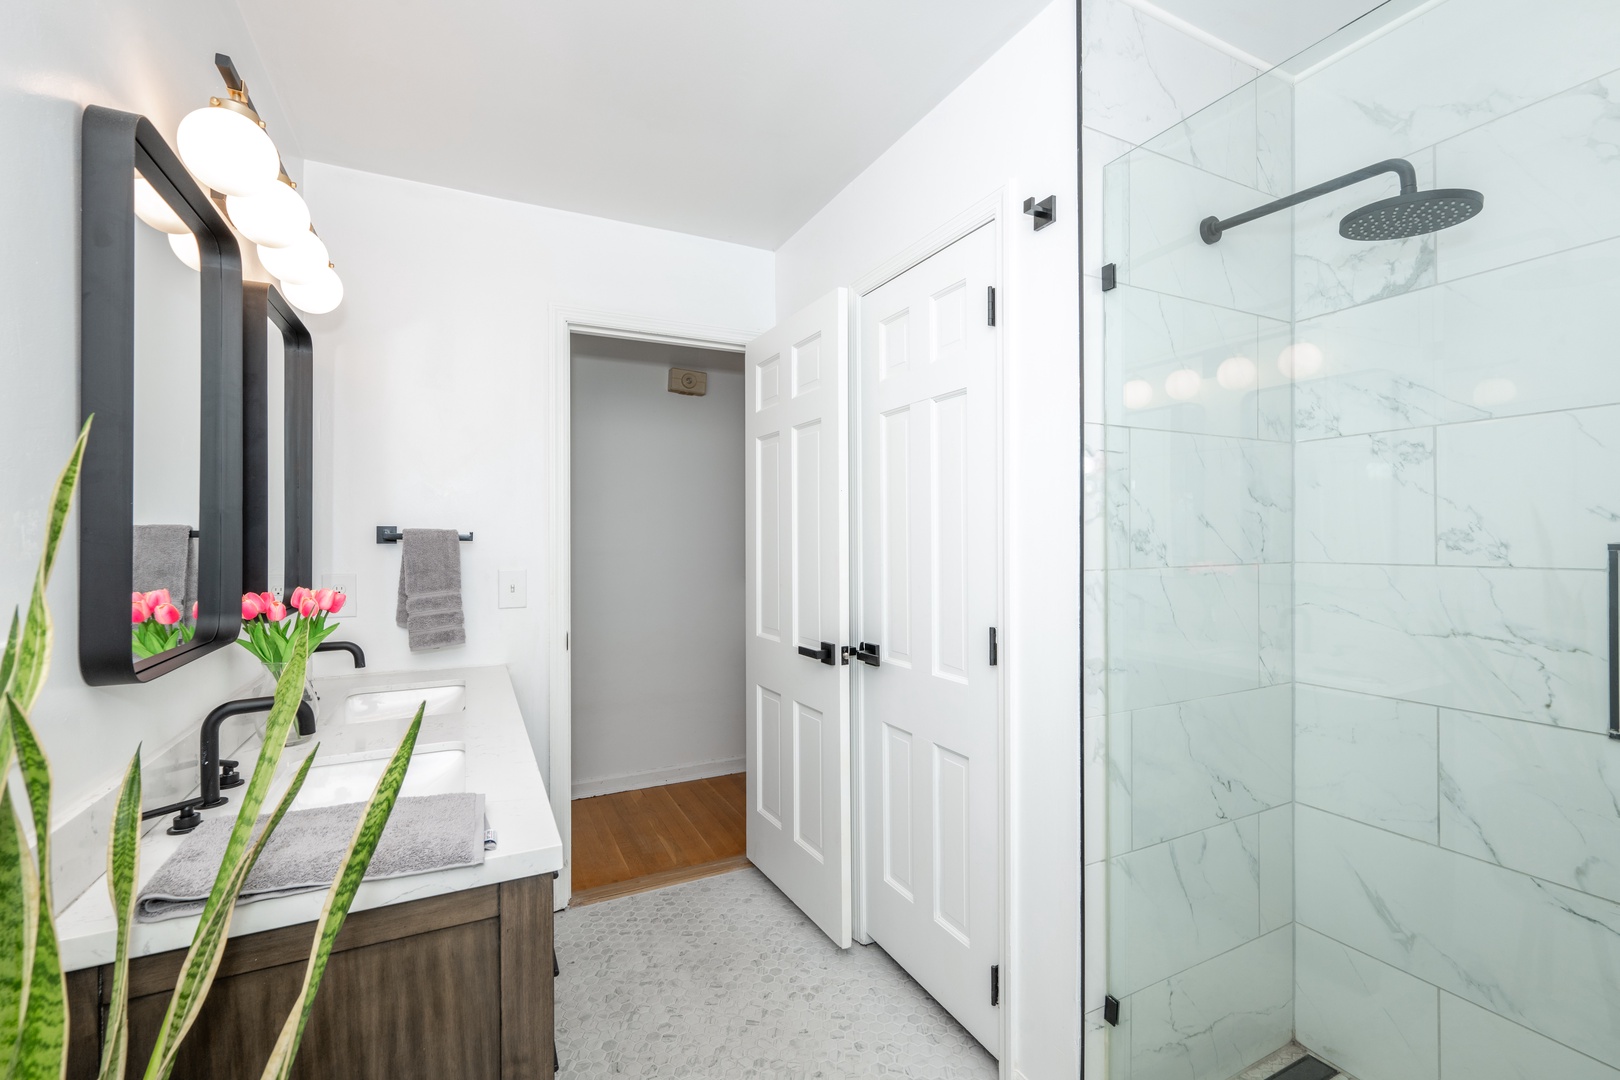 Bathroom shared with stand up shower